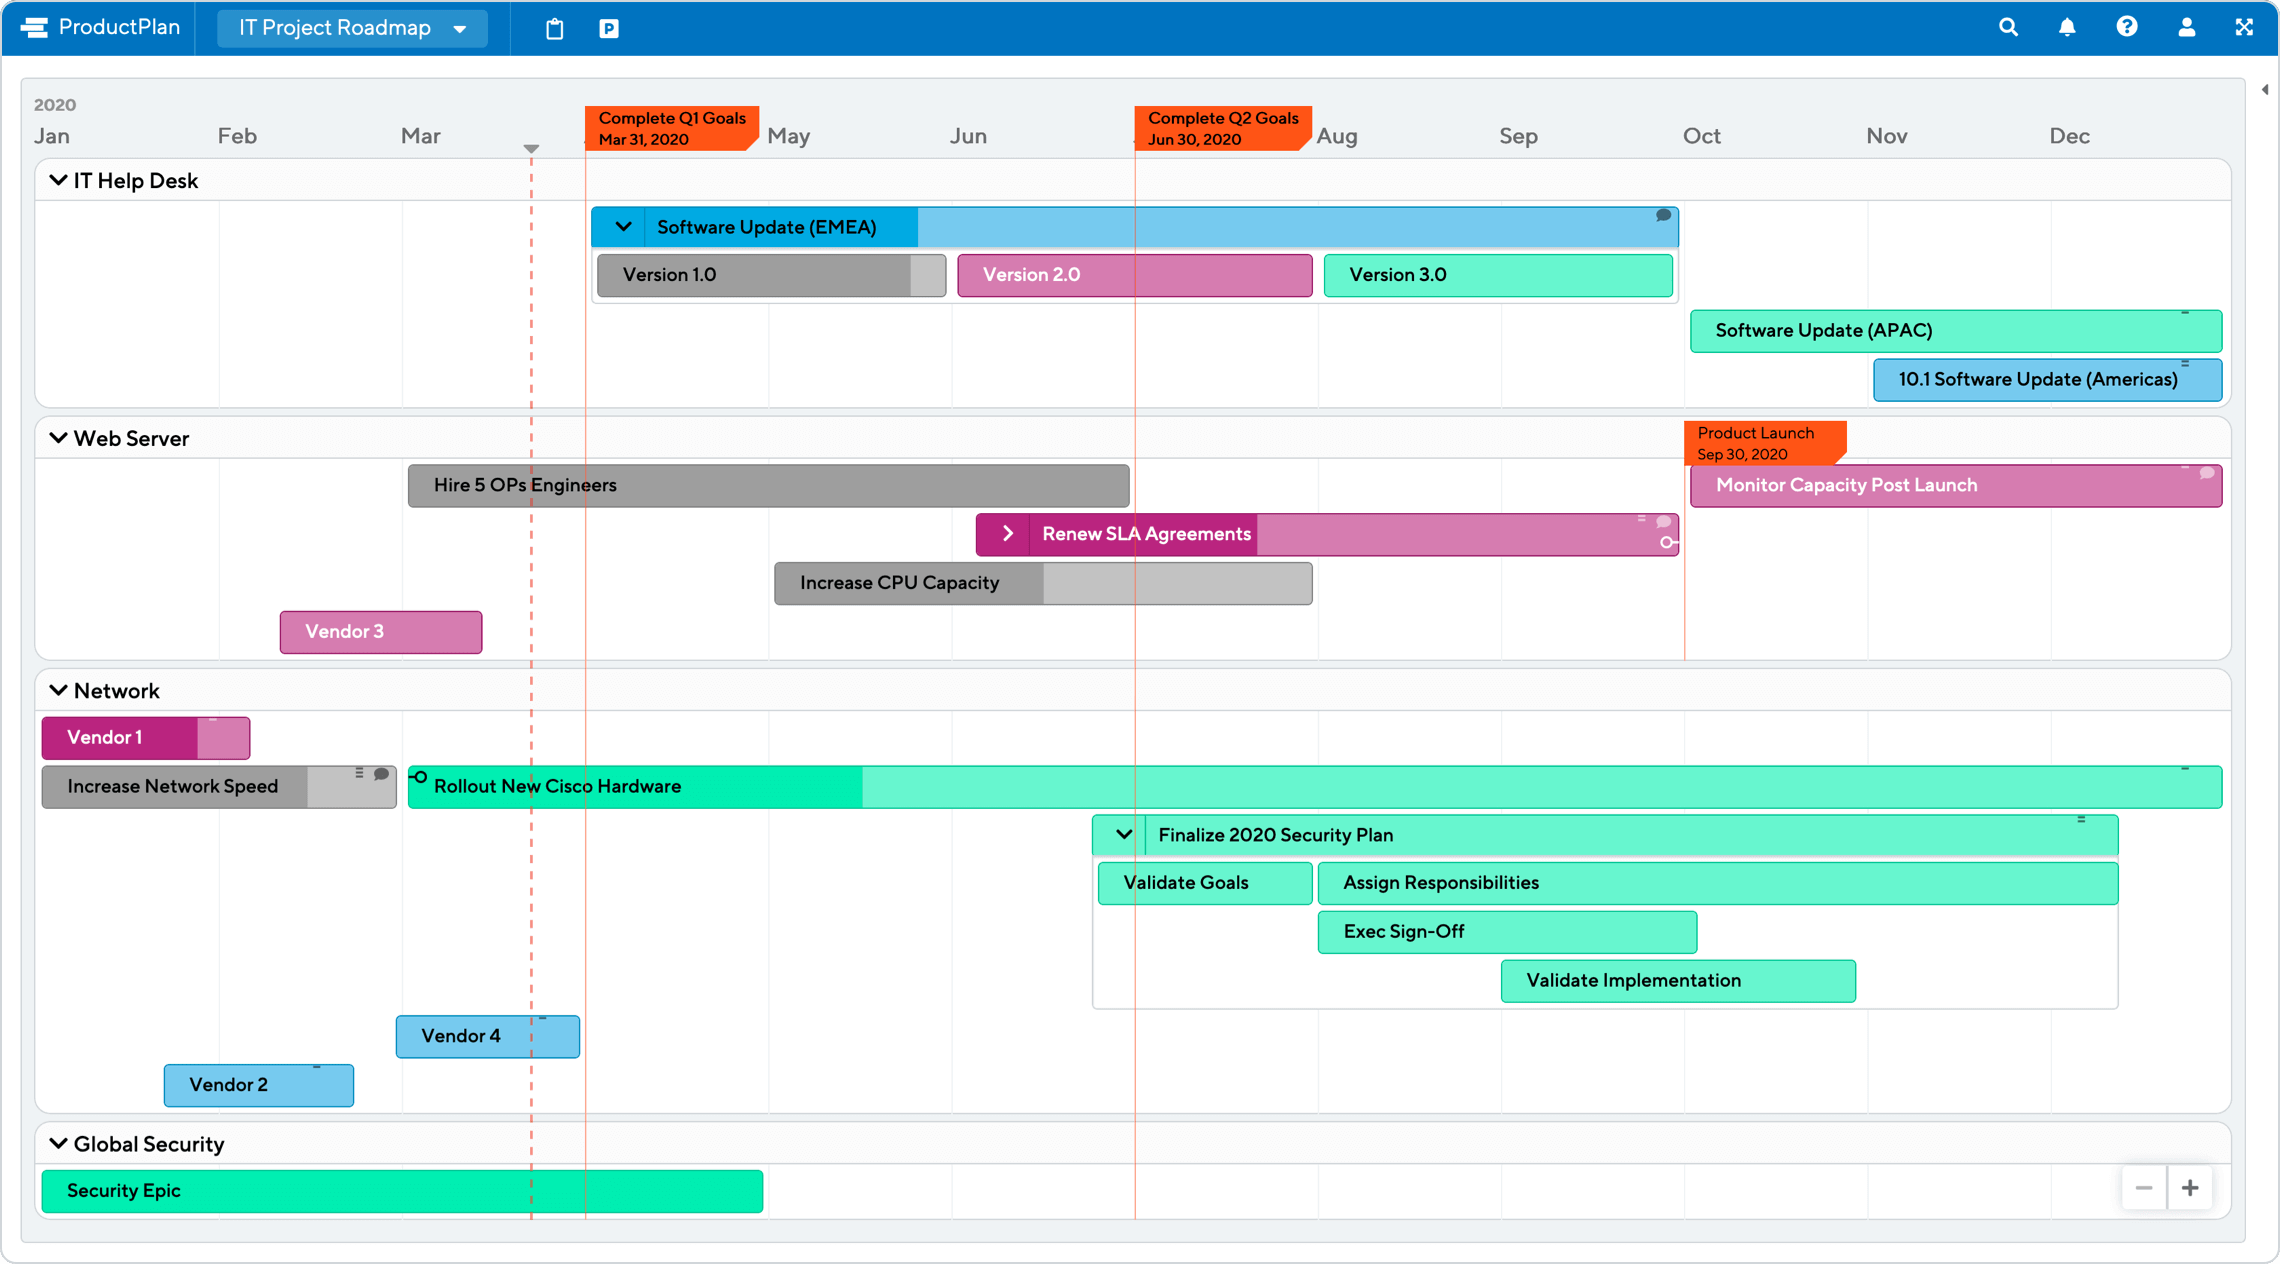 IT Project Roadmap Template by ProductPlan